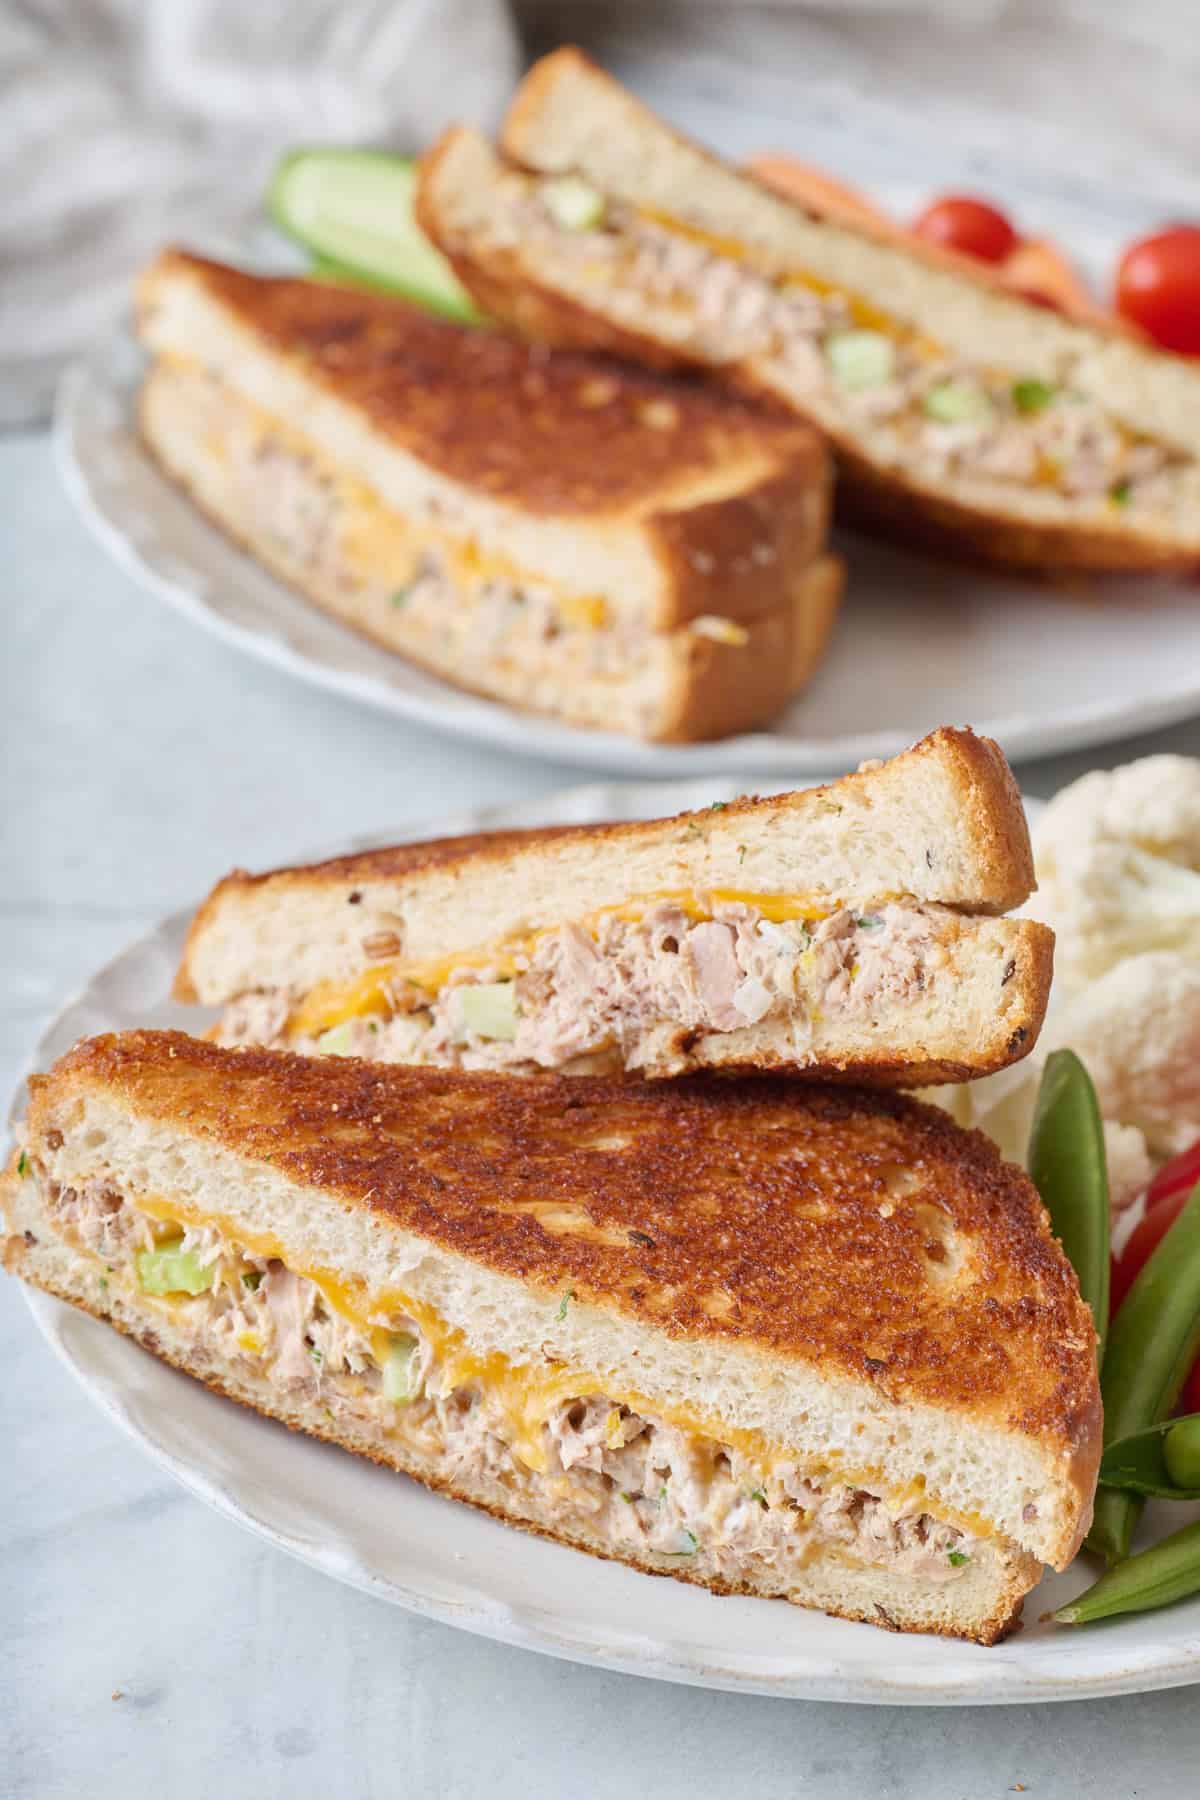 Two tuna melt sandwiches served on a plate with fresh vegetables.